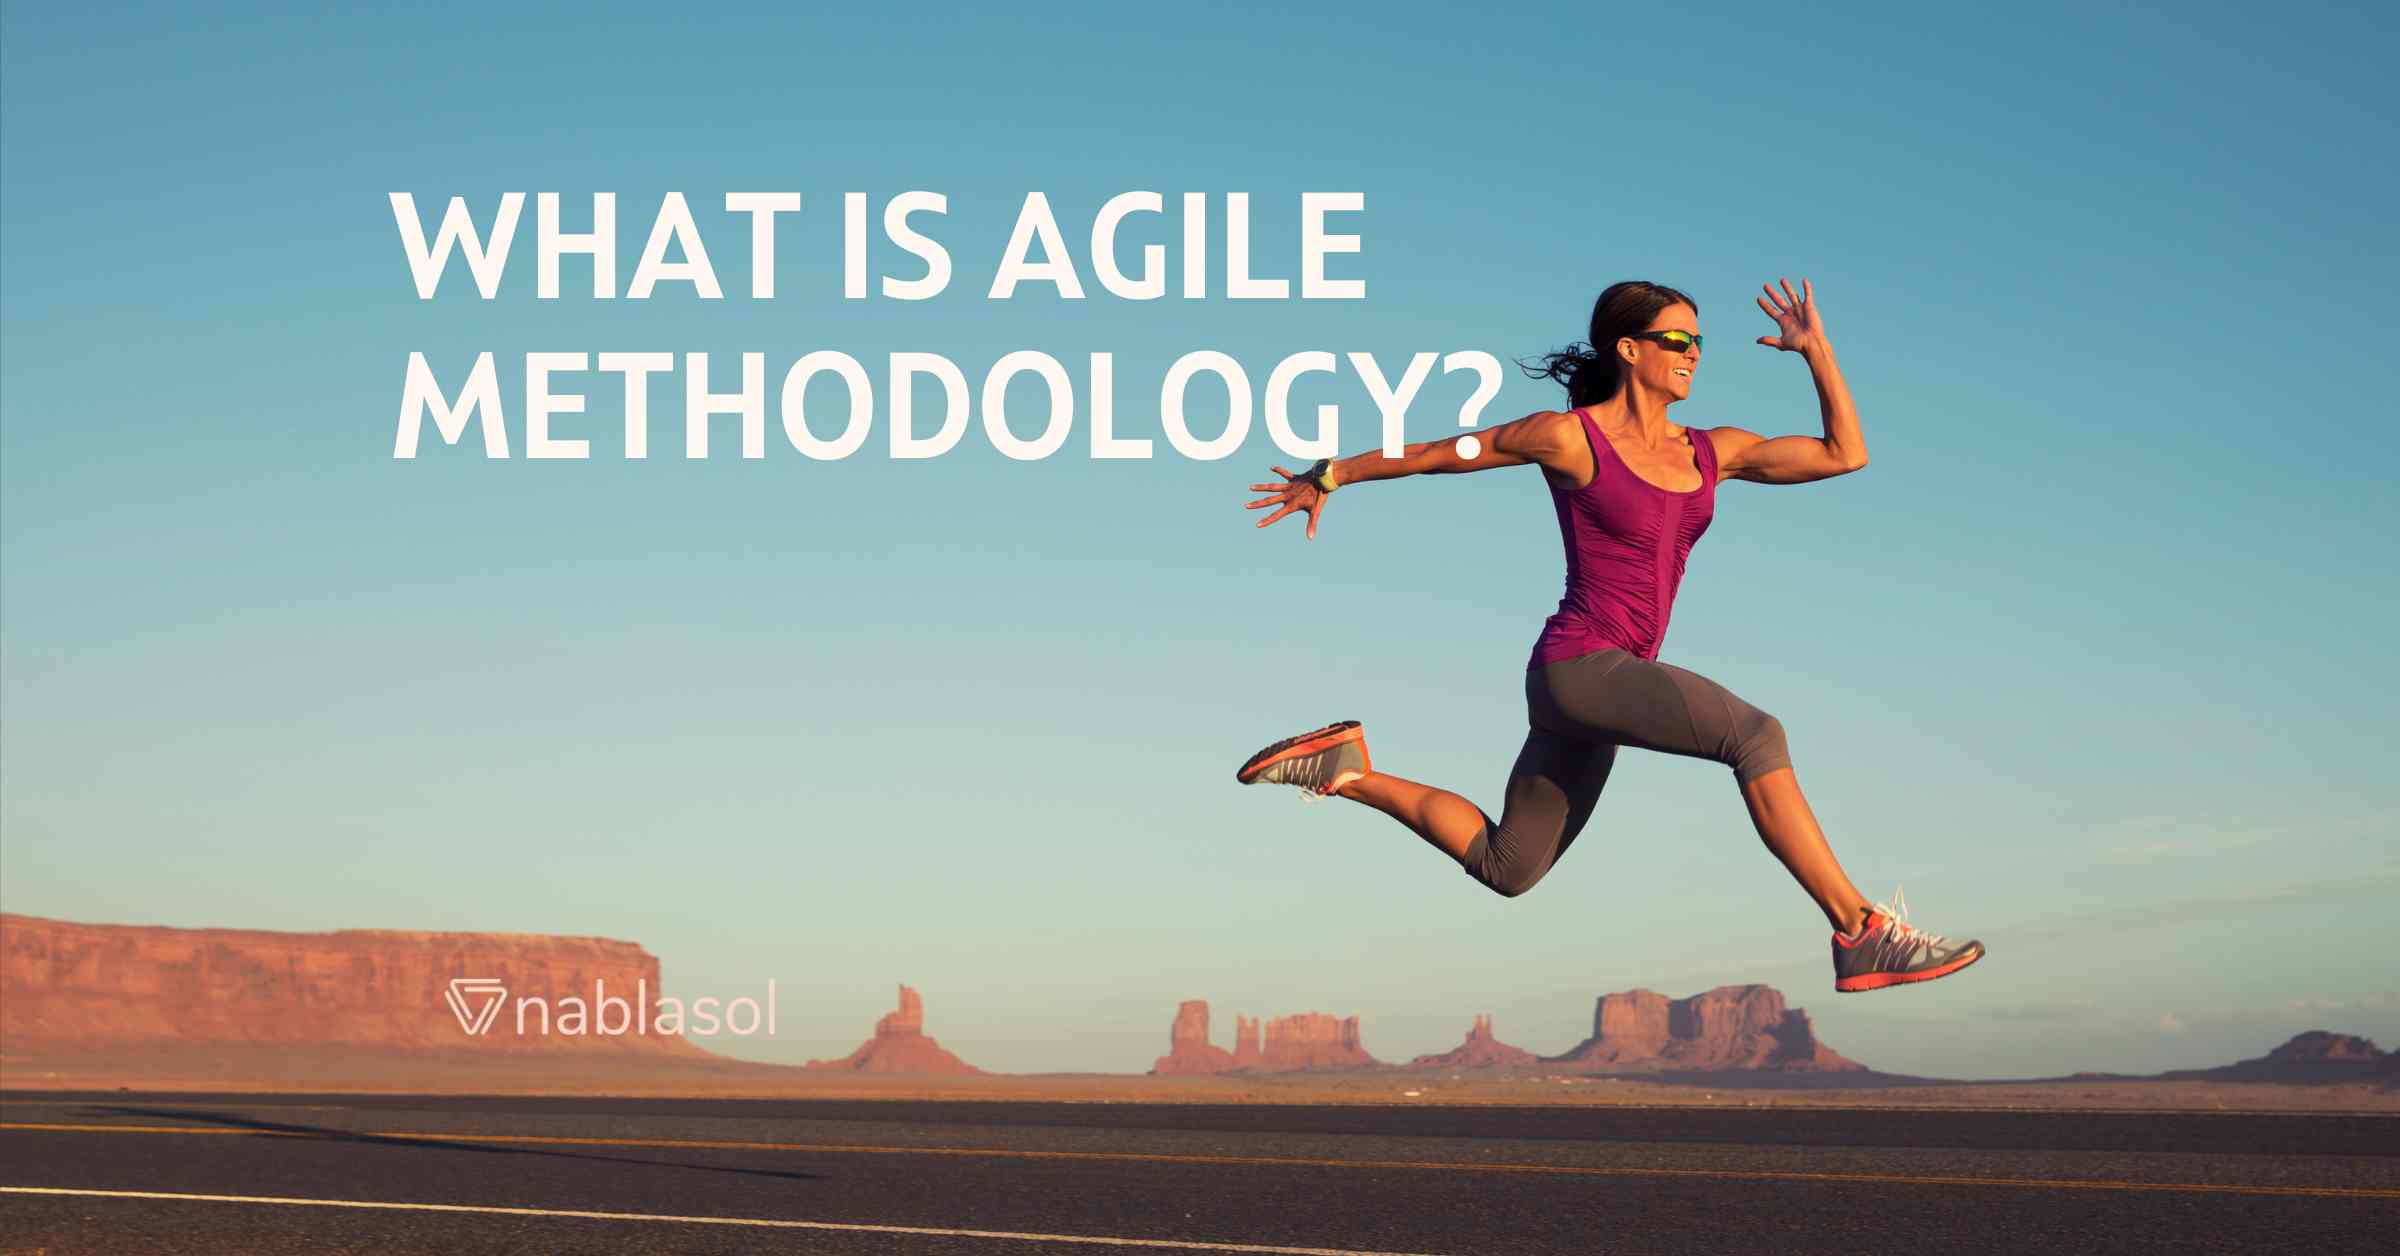 What Is Agile Methodology? – An Introduction | Nablasol